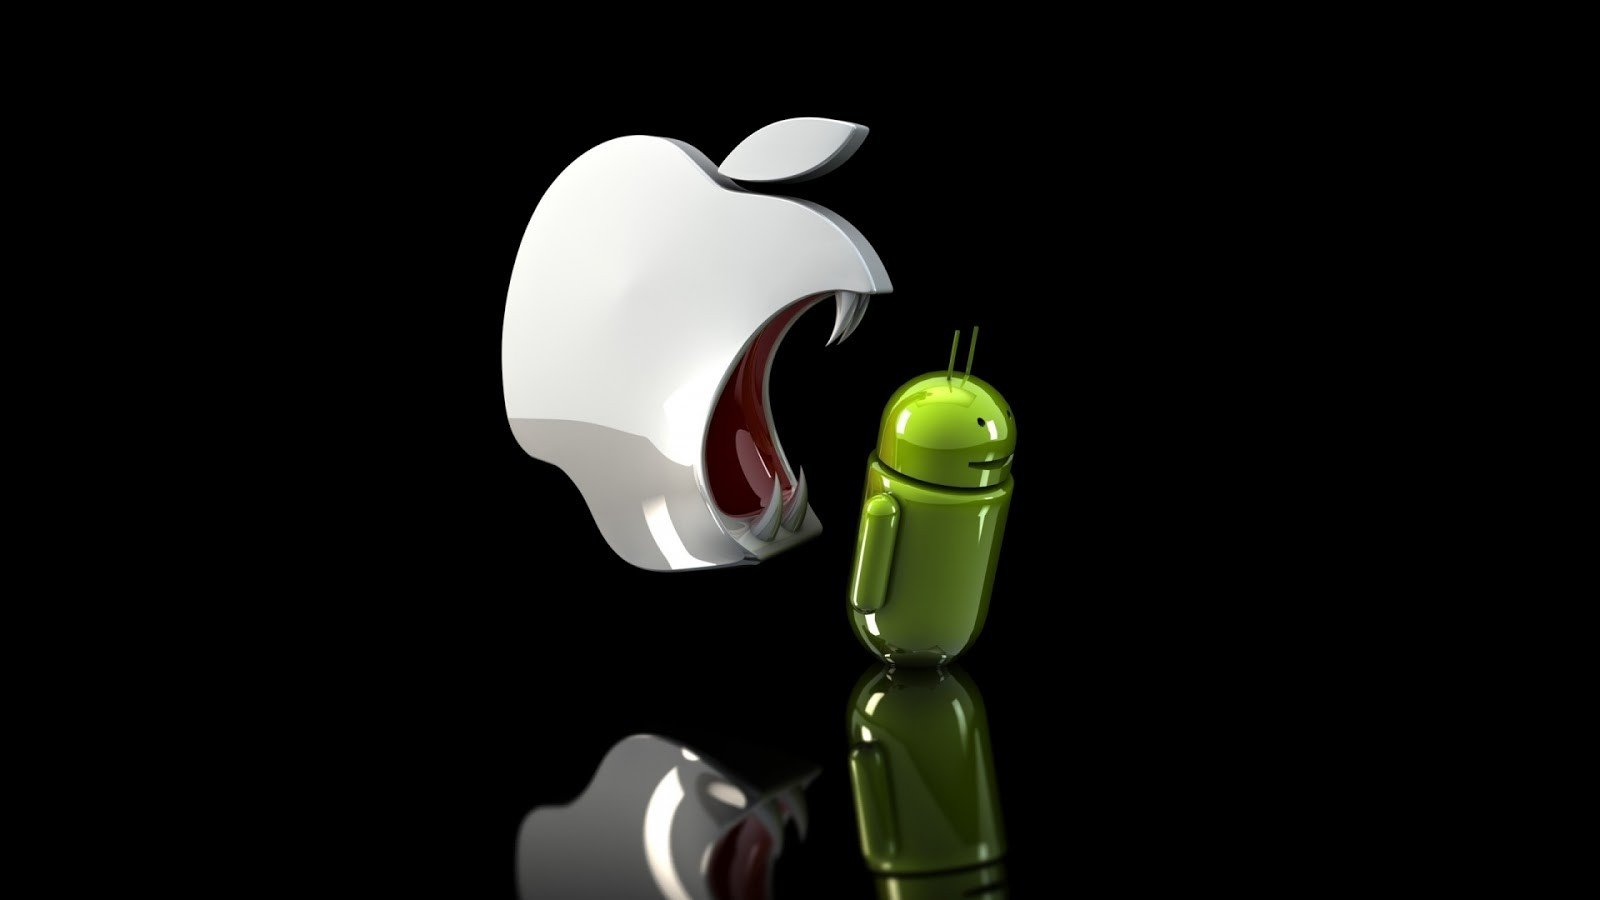 Apple Inc., Android (operating system) Wallpaper